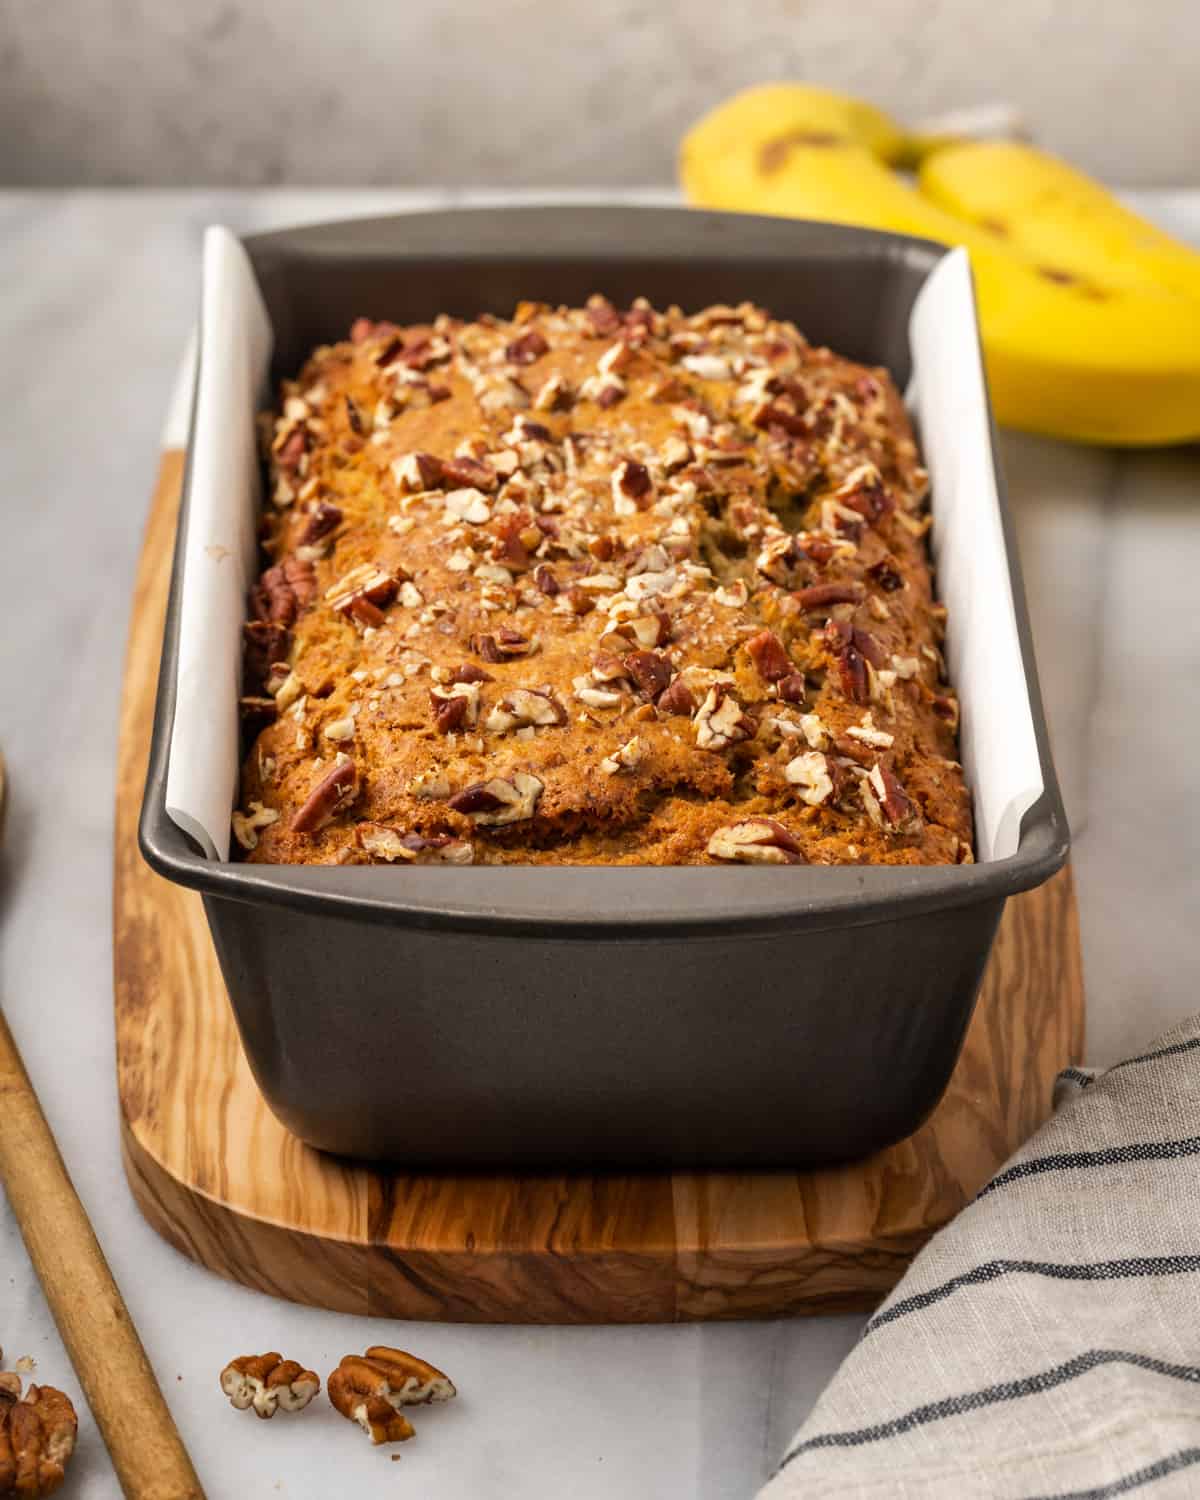 A freshly baked loaf of banana bread topped with pecans in a metal baking tin.